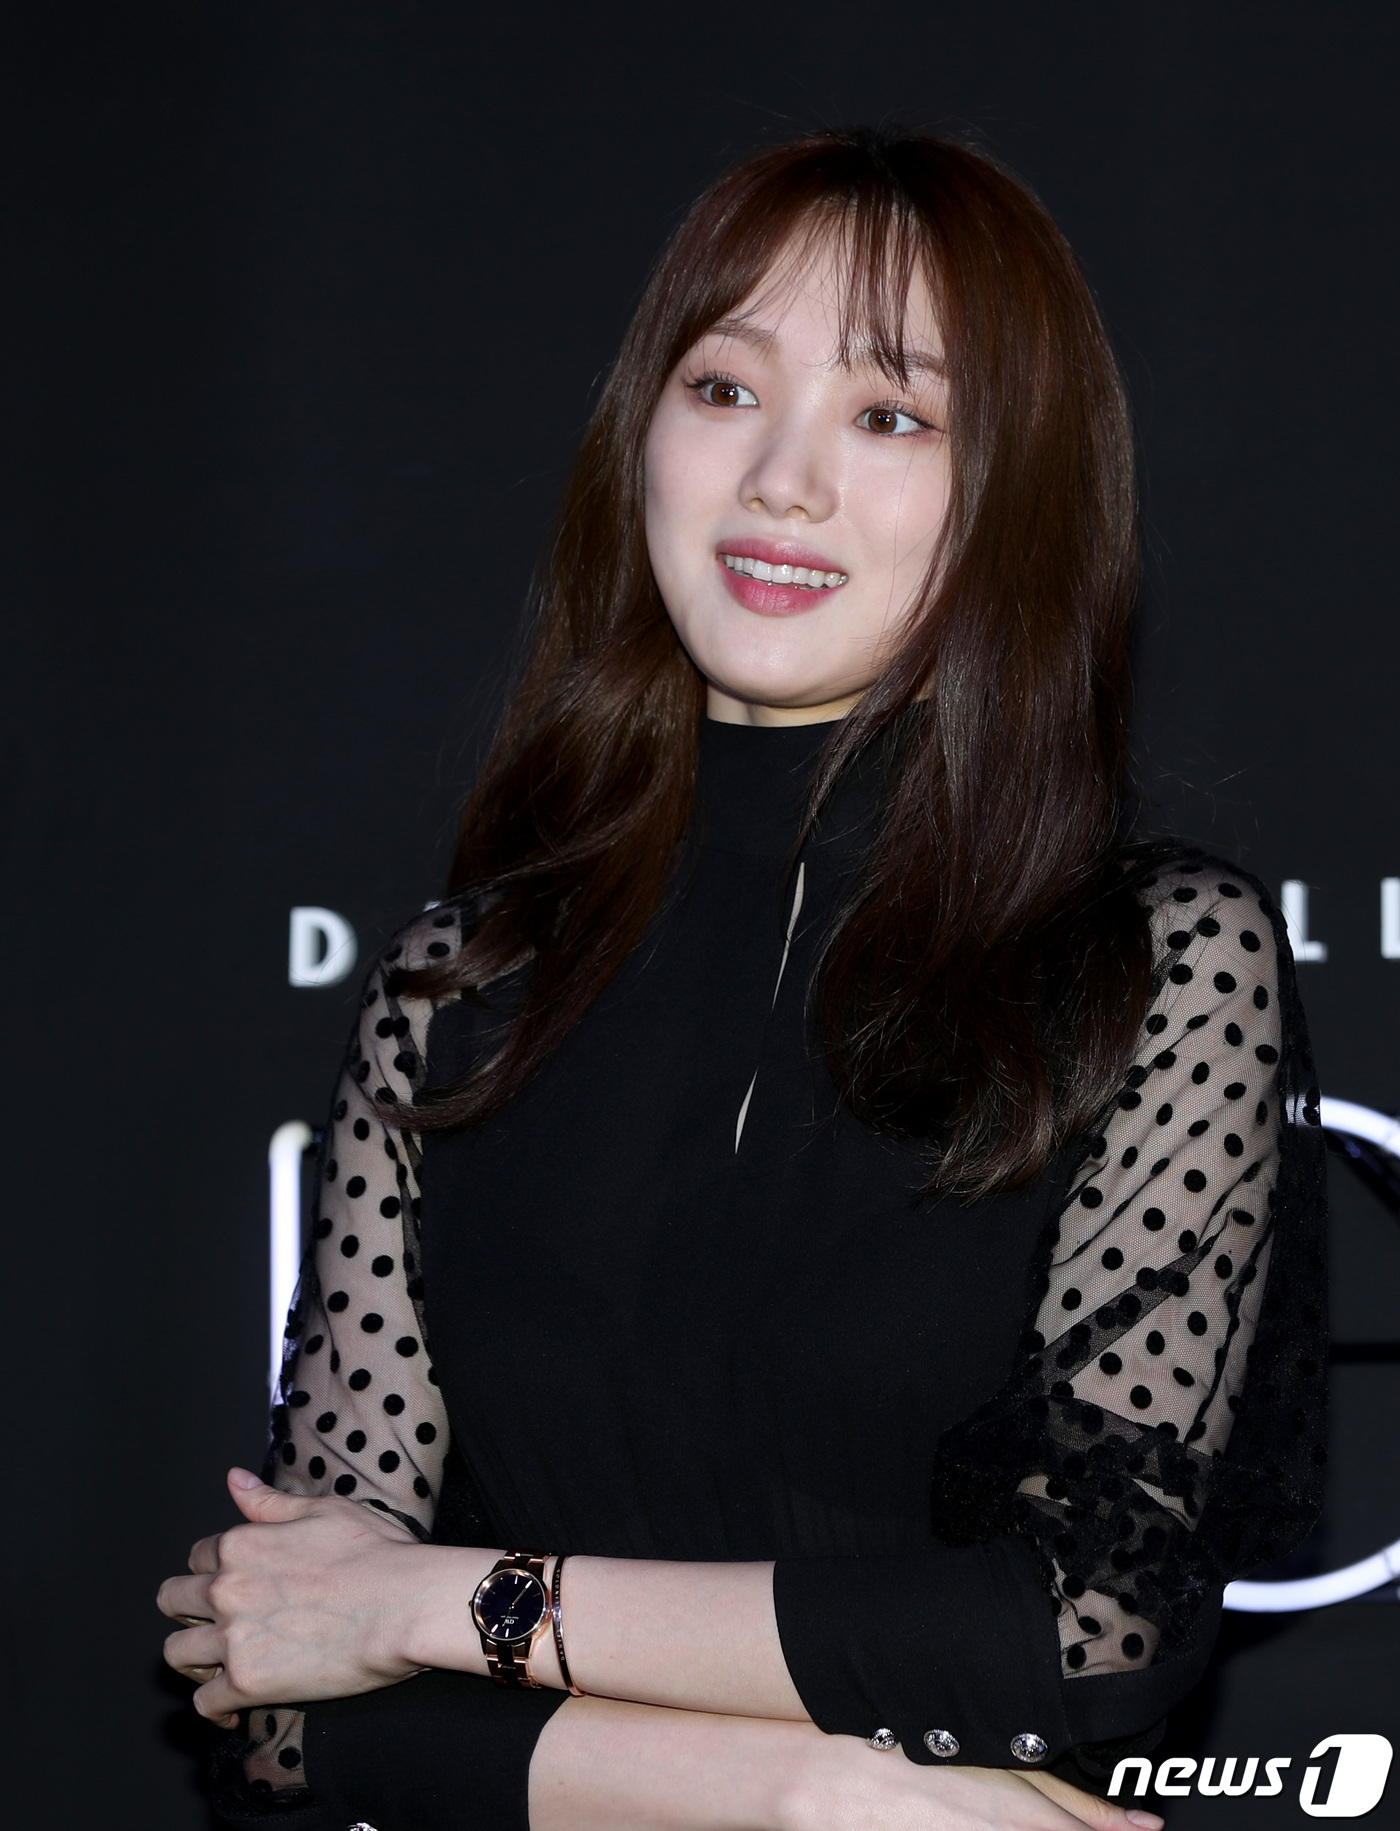 Seoul=) = Actor Lee Sung-kyung poses at the Swedish watch and accessory brand Daniel Wellington (DANIEL WELLINGTON) photo event at the Seoul Samcheong Flagship Store on Thursday afternoon.October 17, 2019